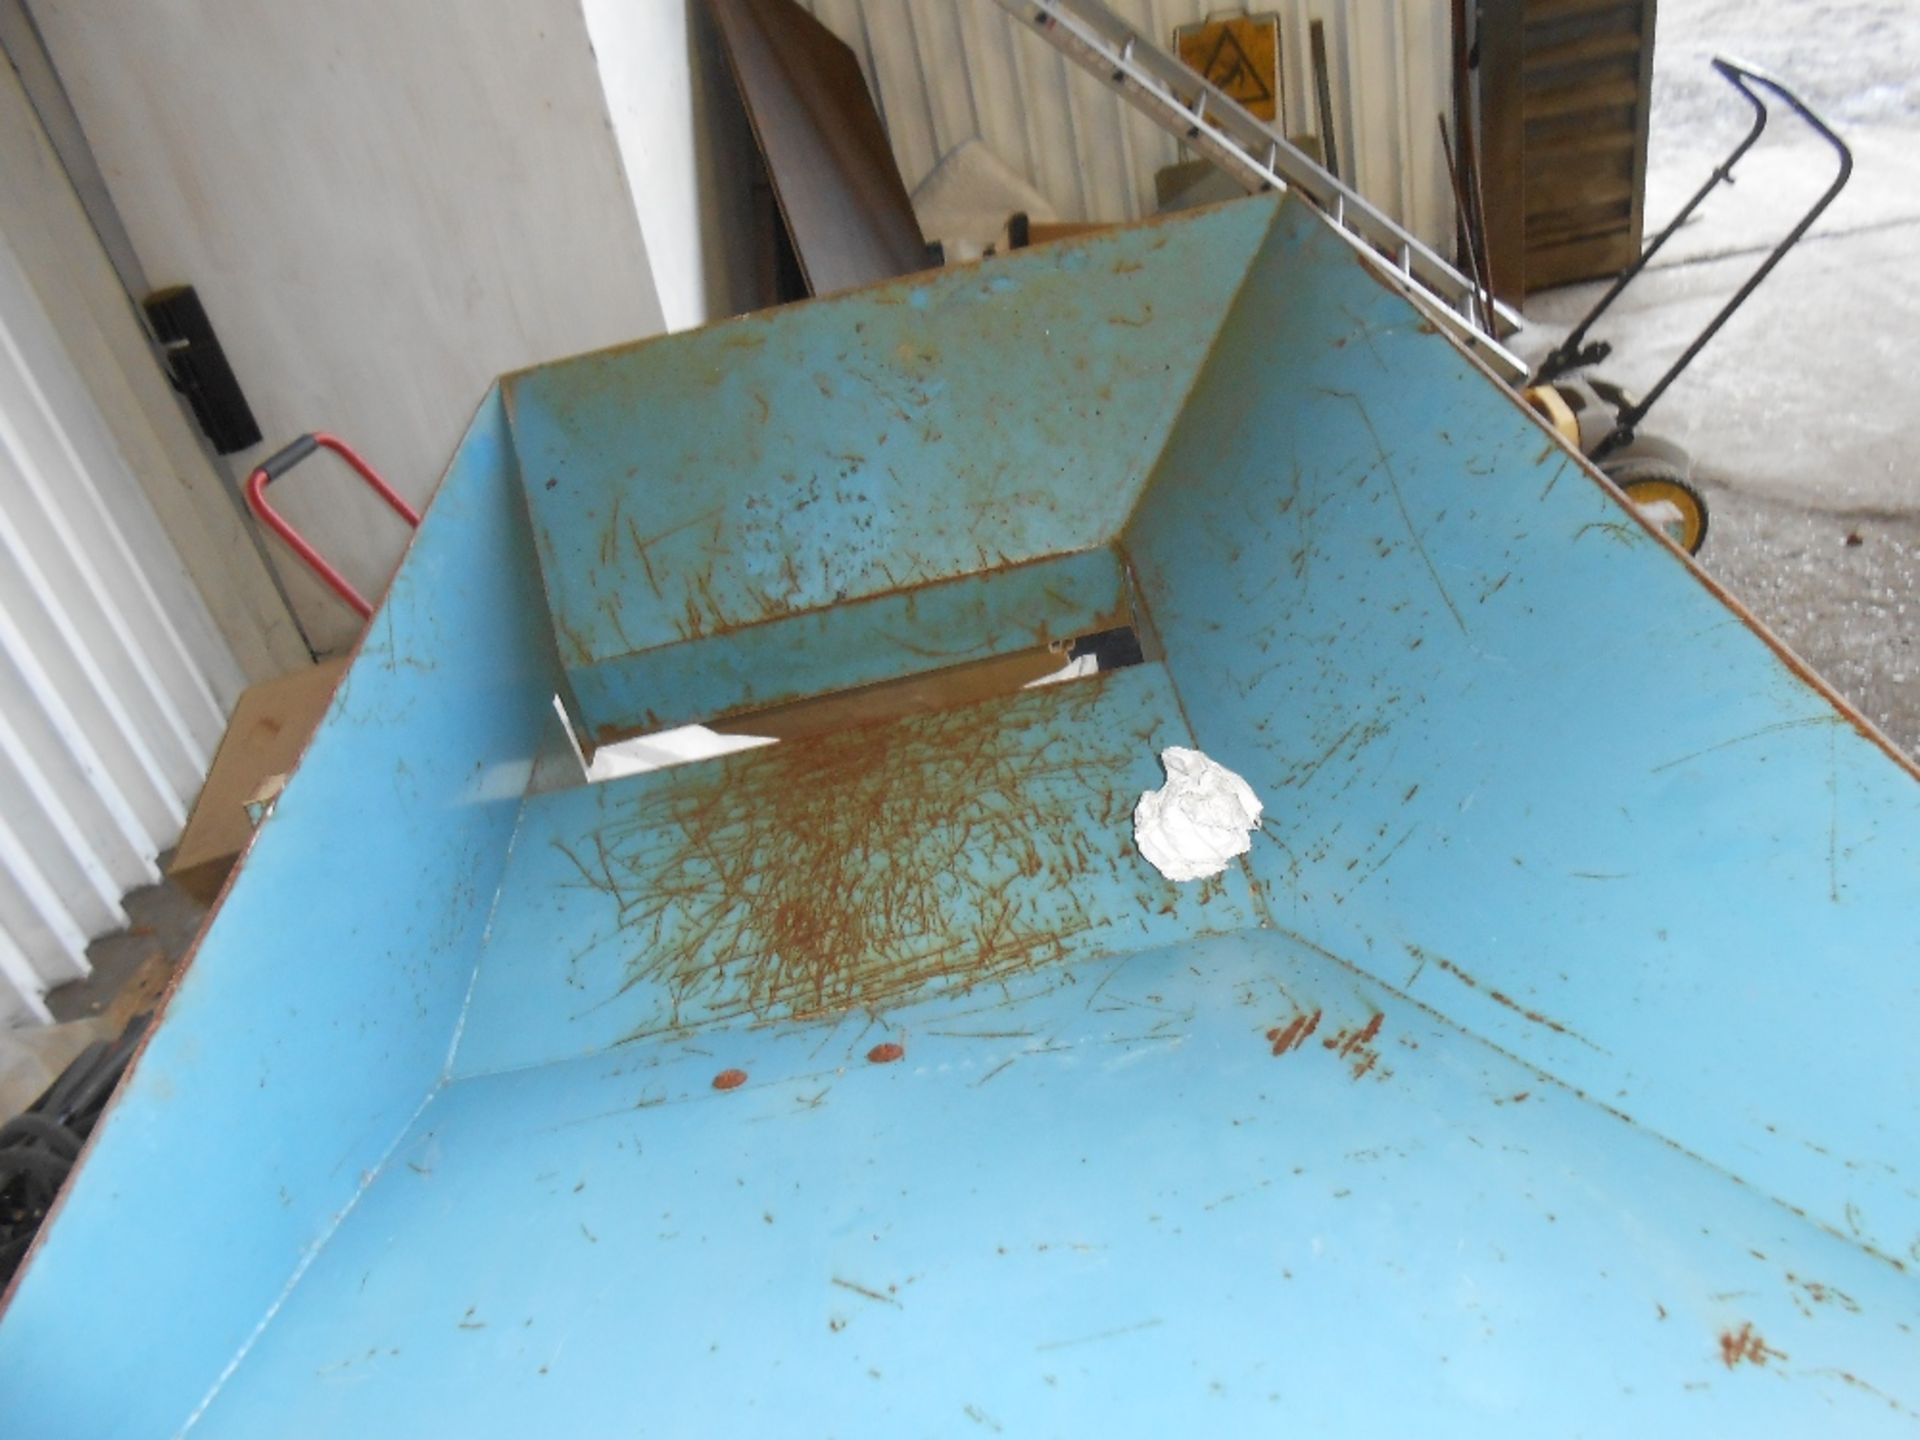 Krenol fibre insulation shredder and blower unit sourced from company liquidation. - Image 4 of 5